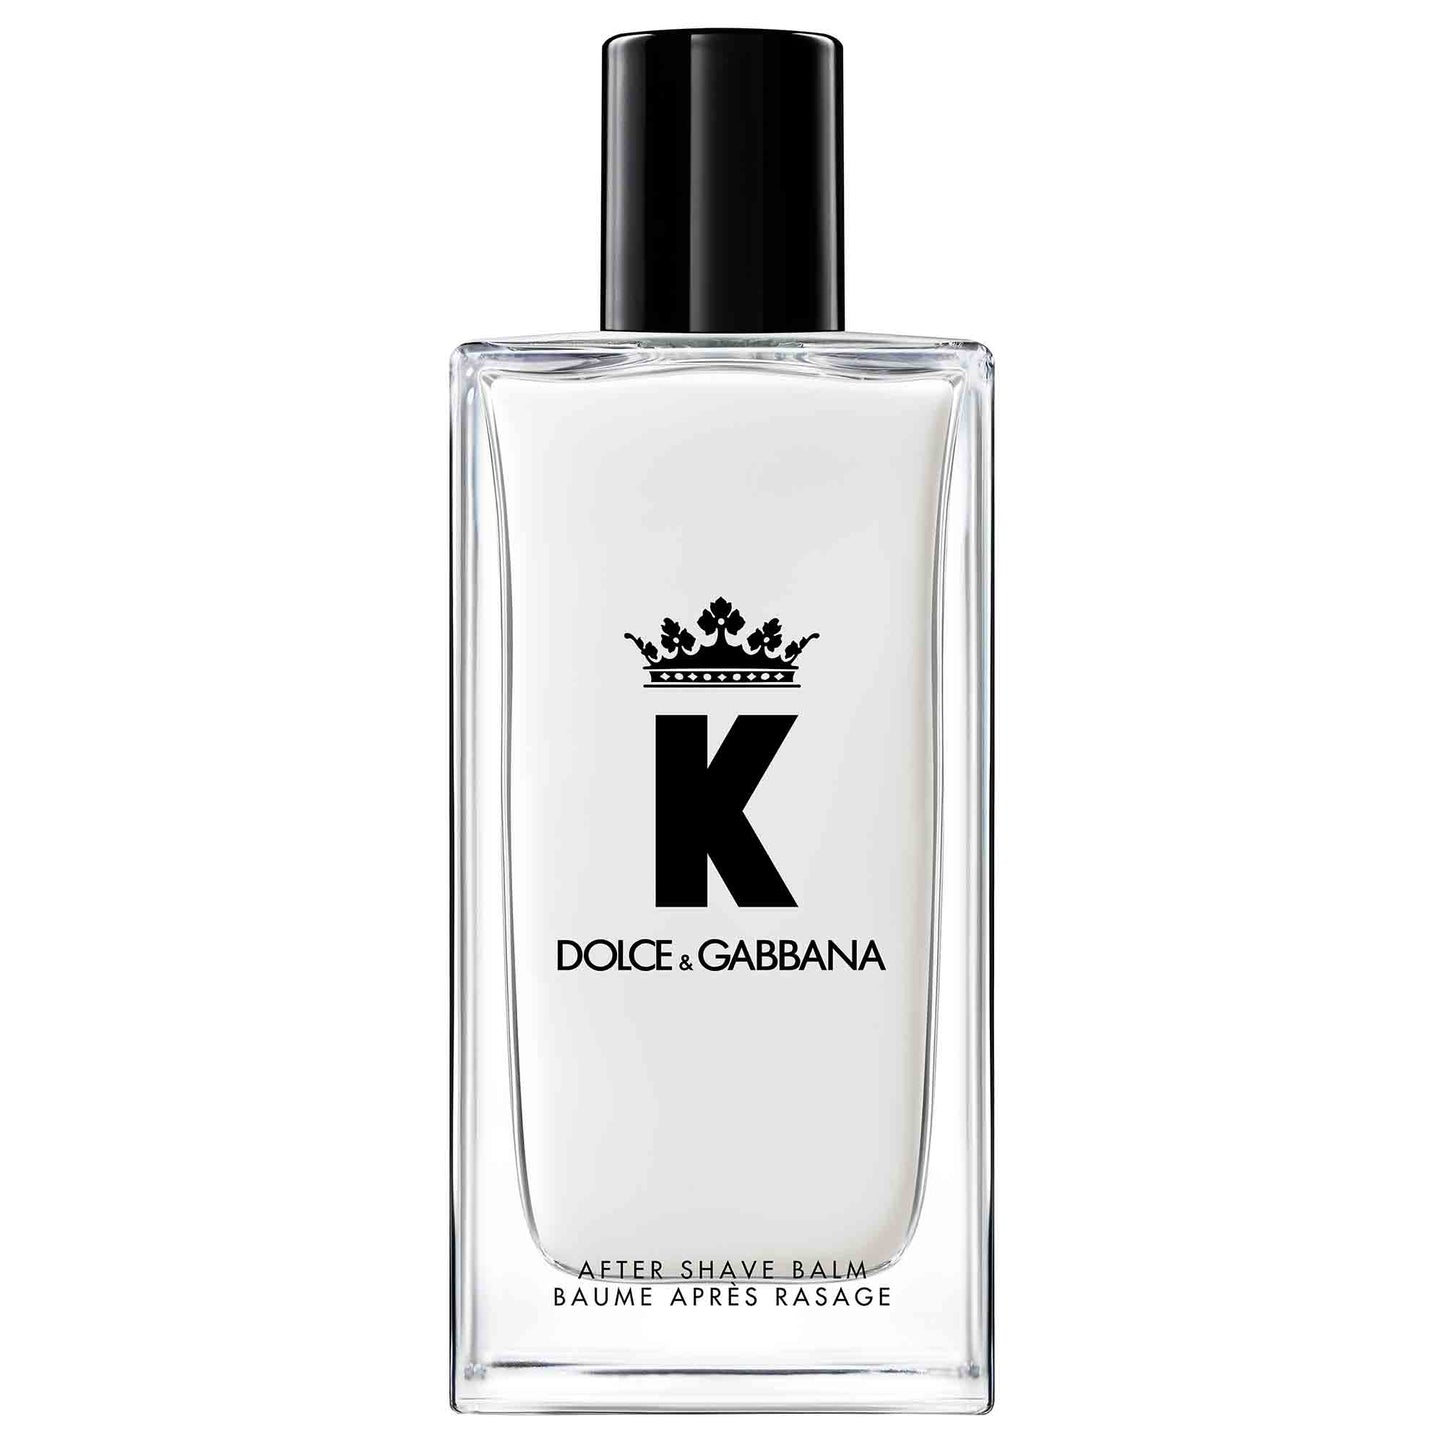 K by Dolce&Gabbana After Shave